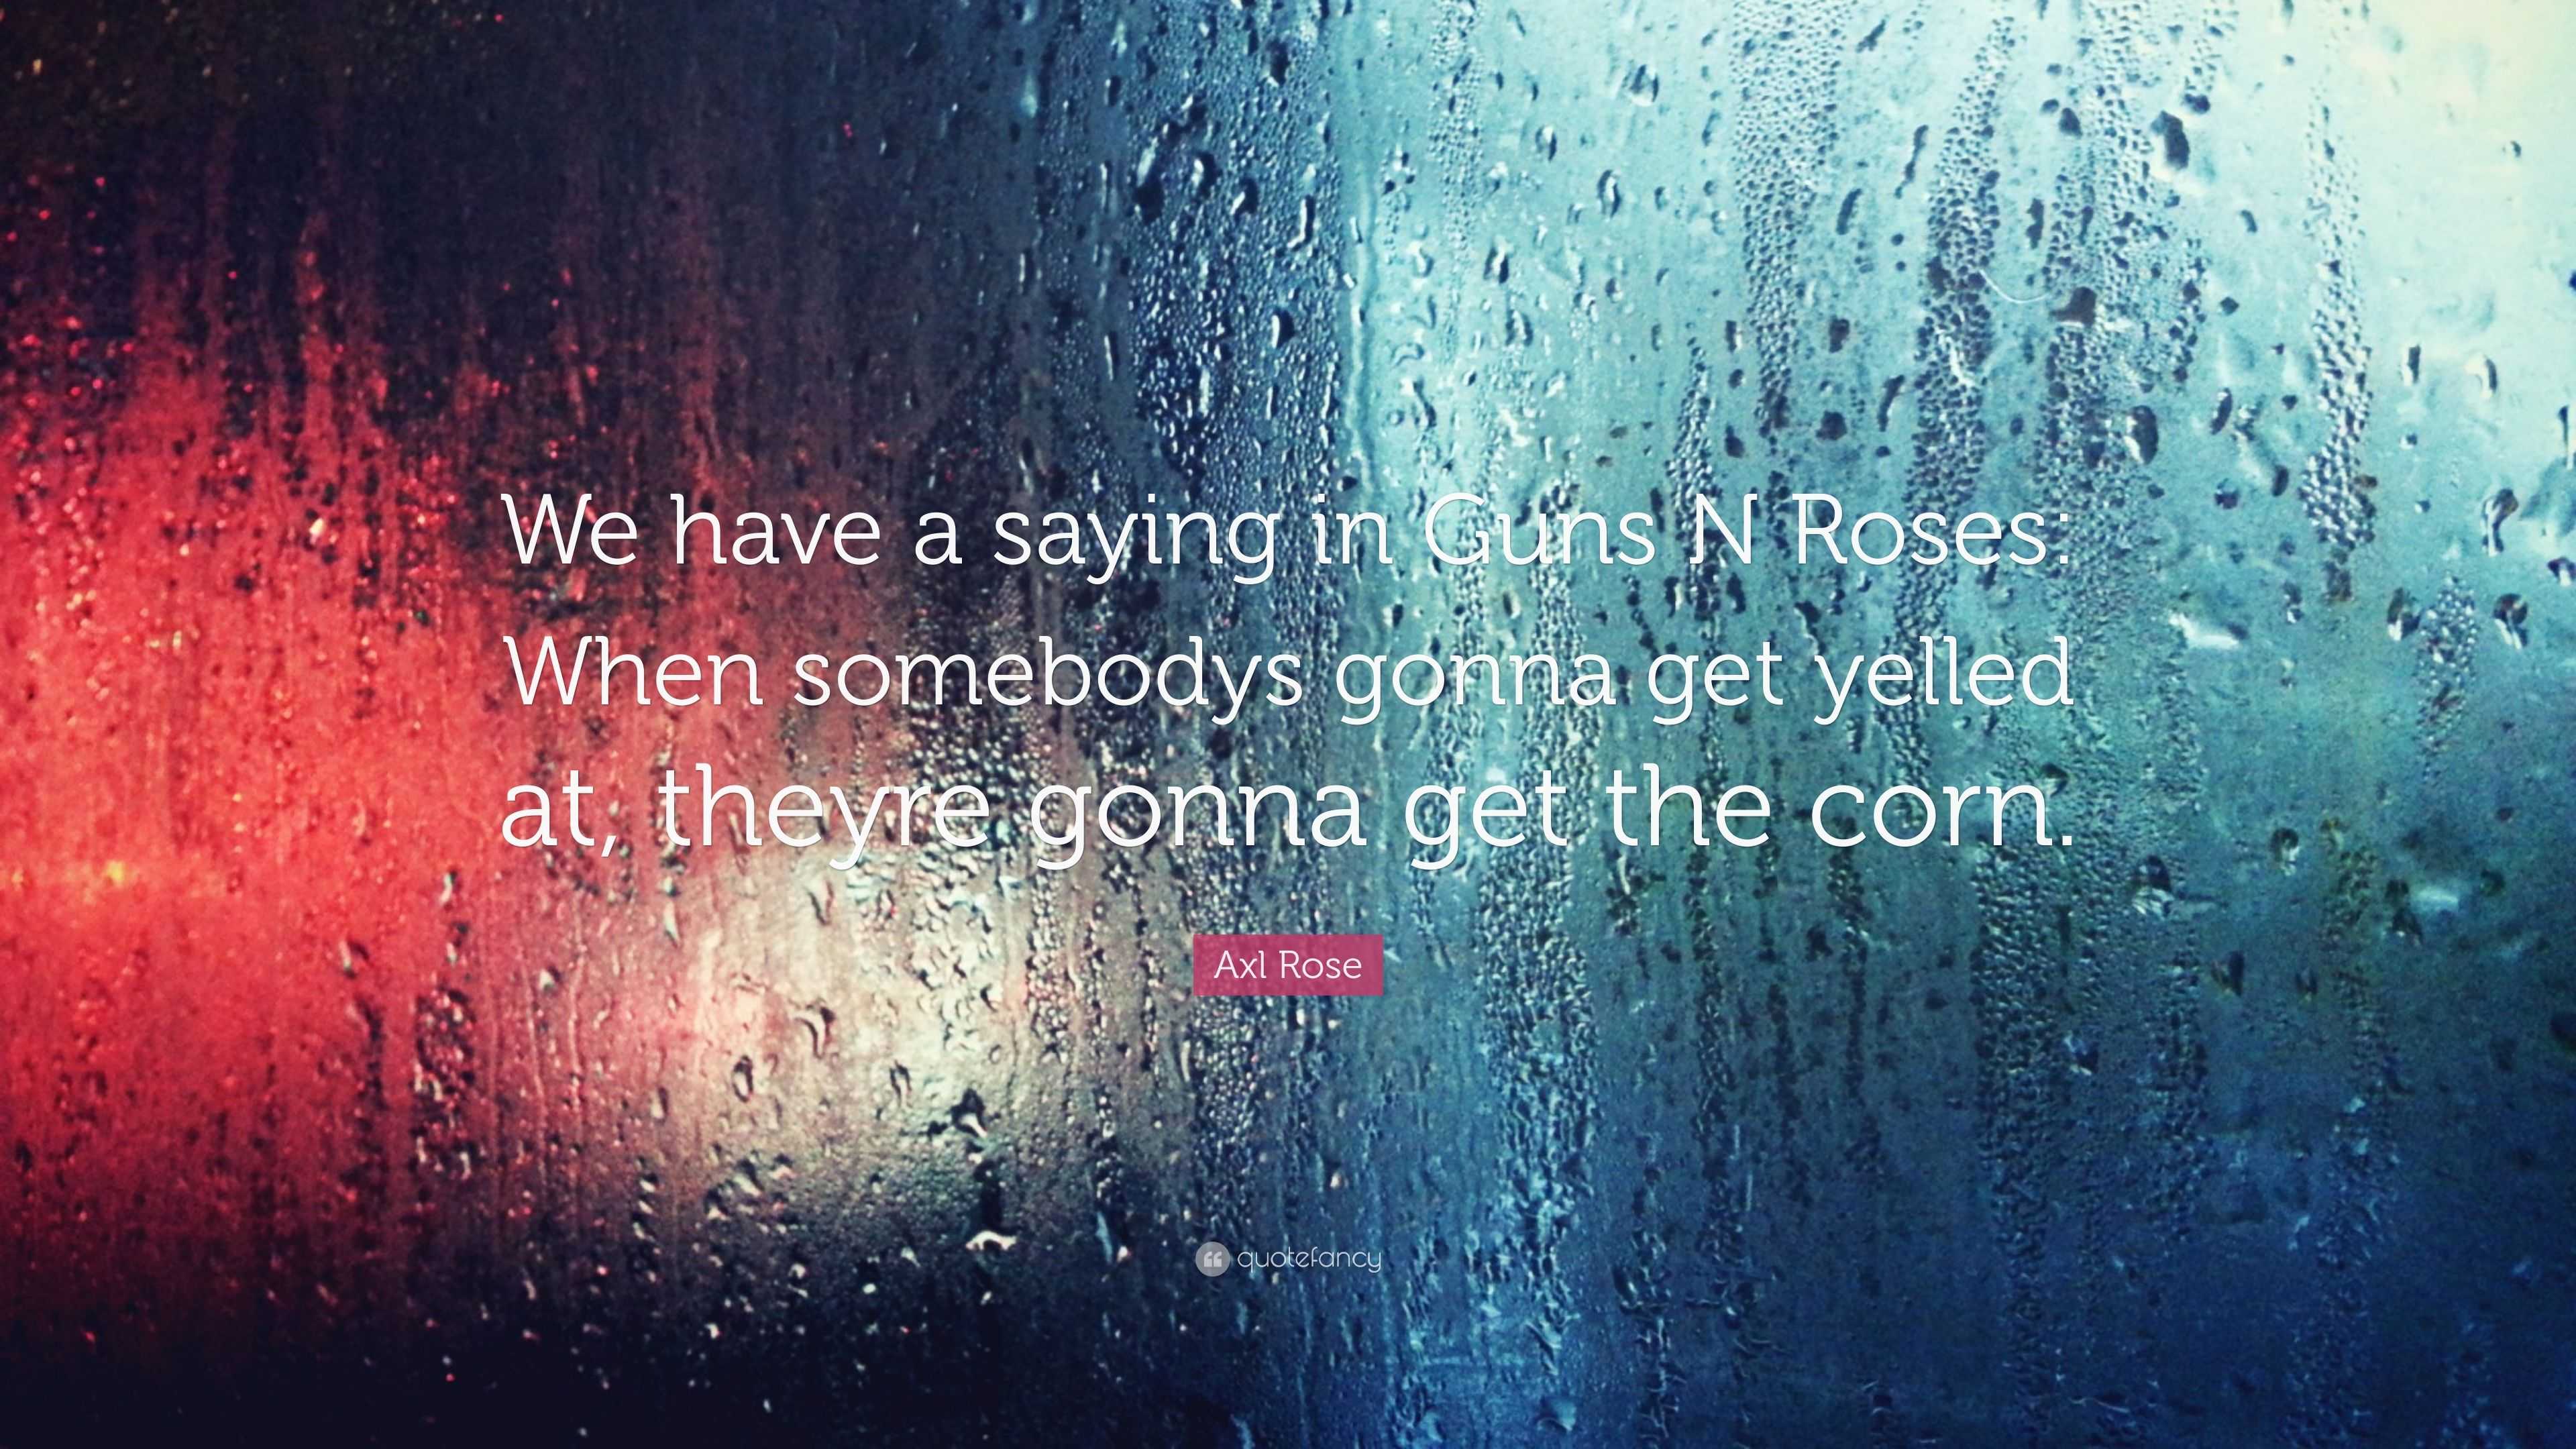 Axl Rose Quote: "We have a saying in Guns N Roses: When somebodys gonna ...